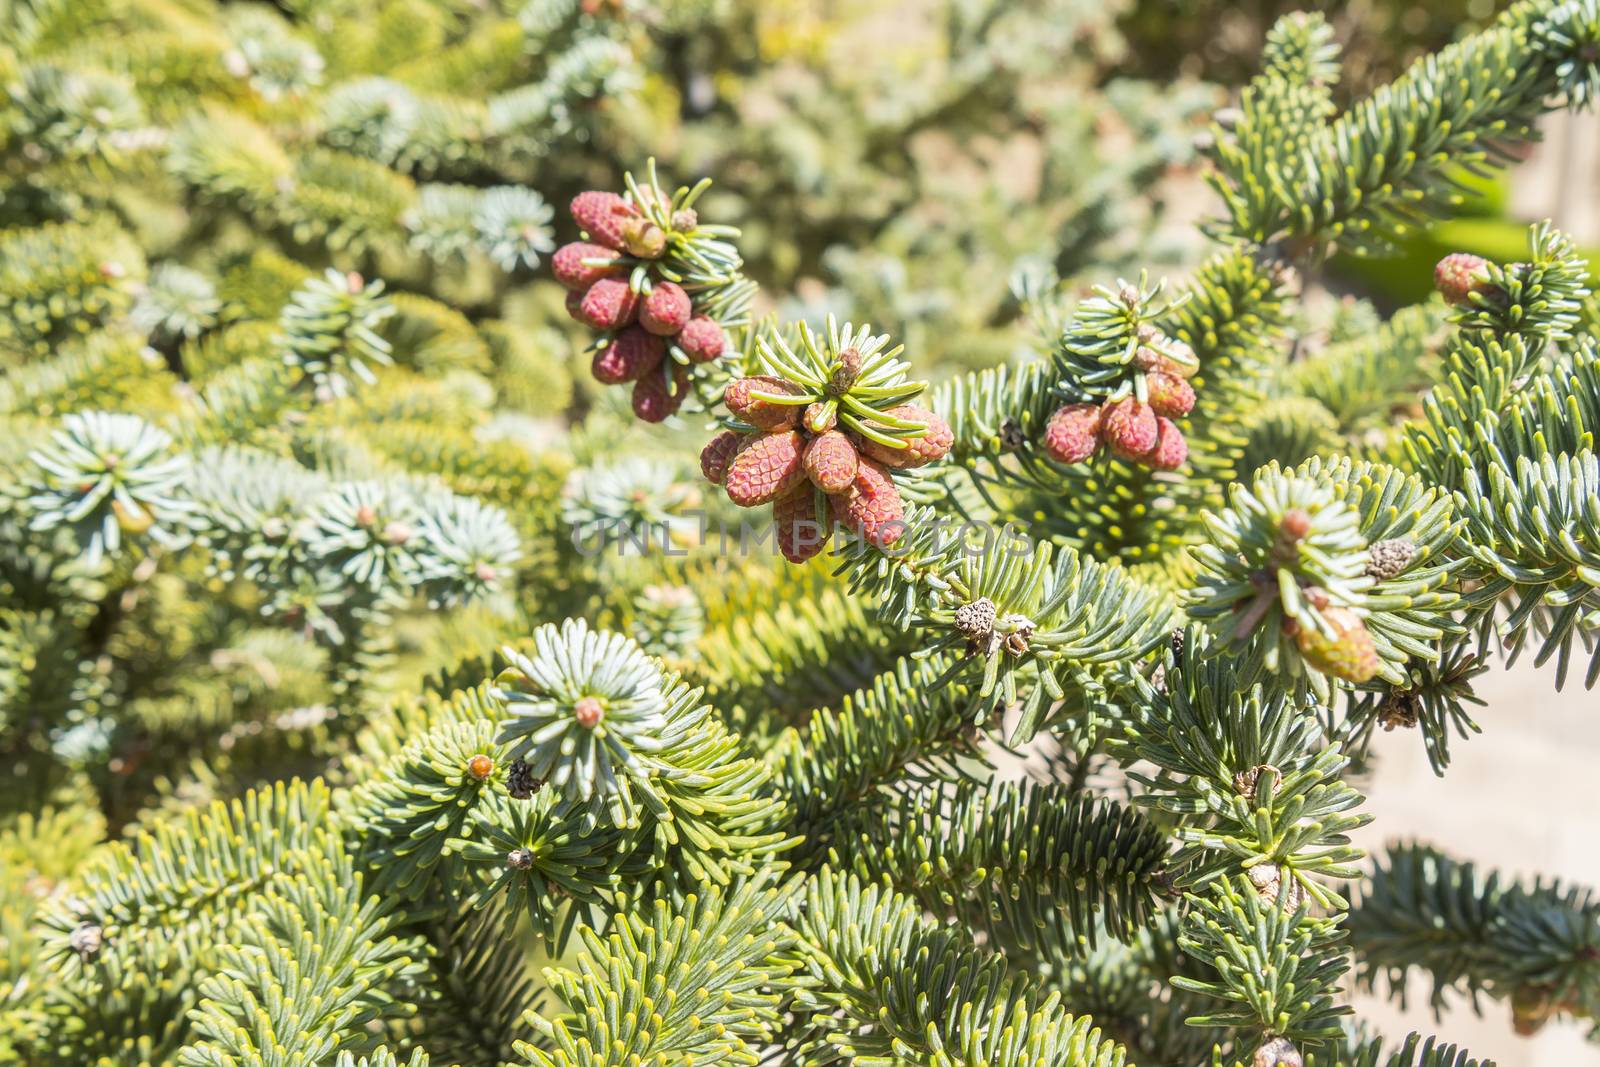 Abies pinsapo branches with fruits